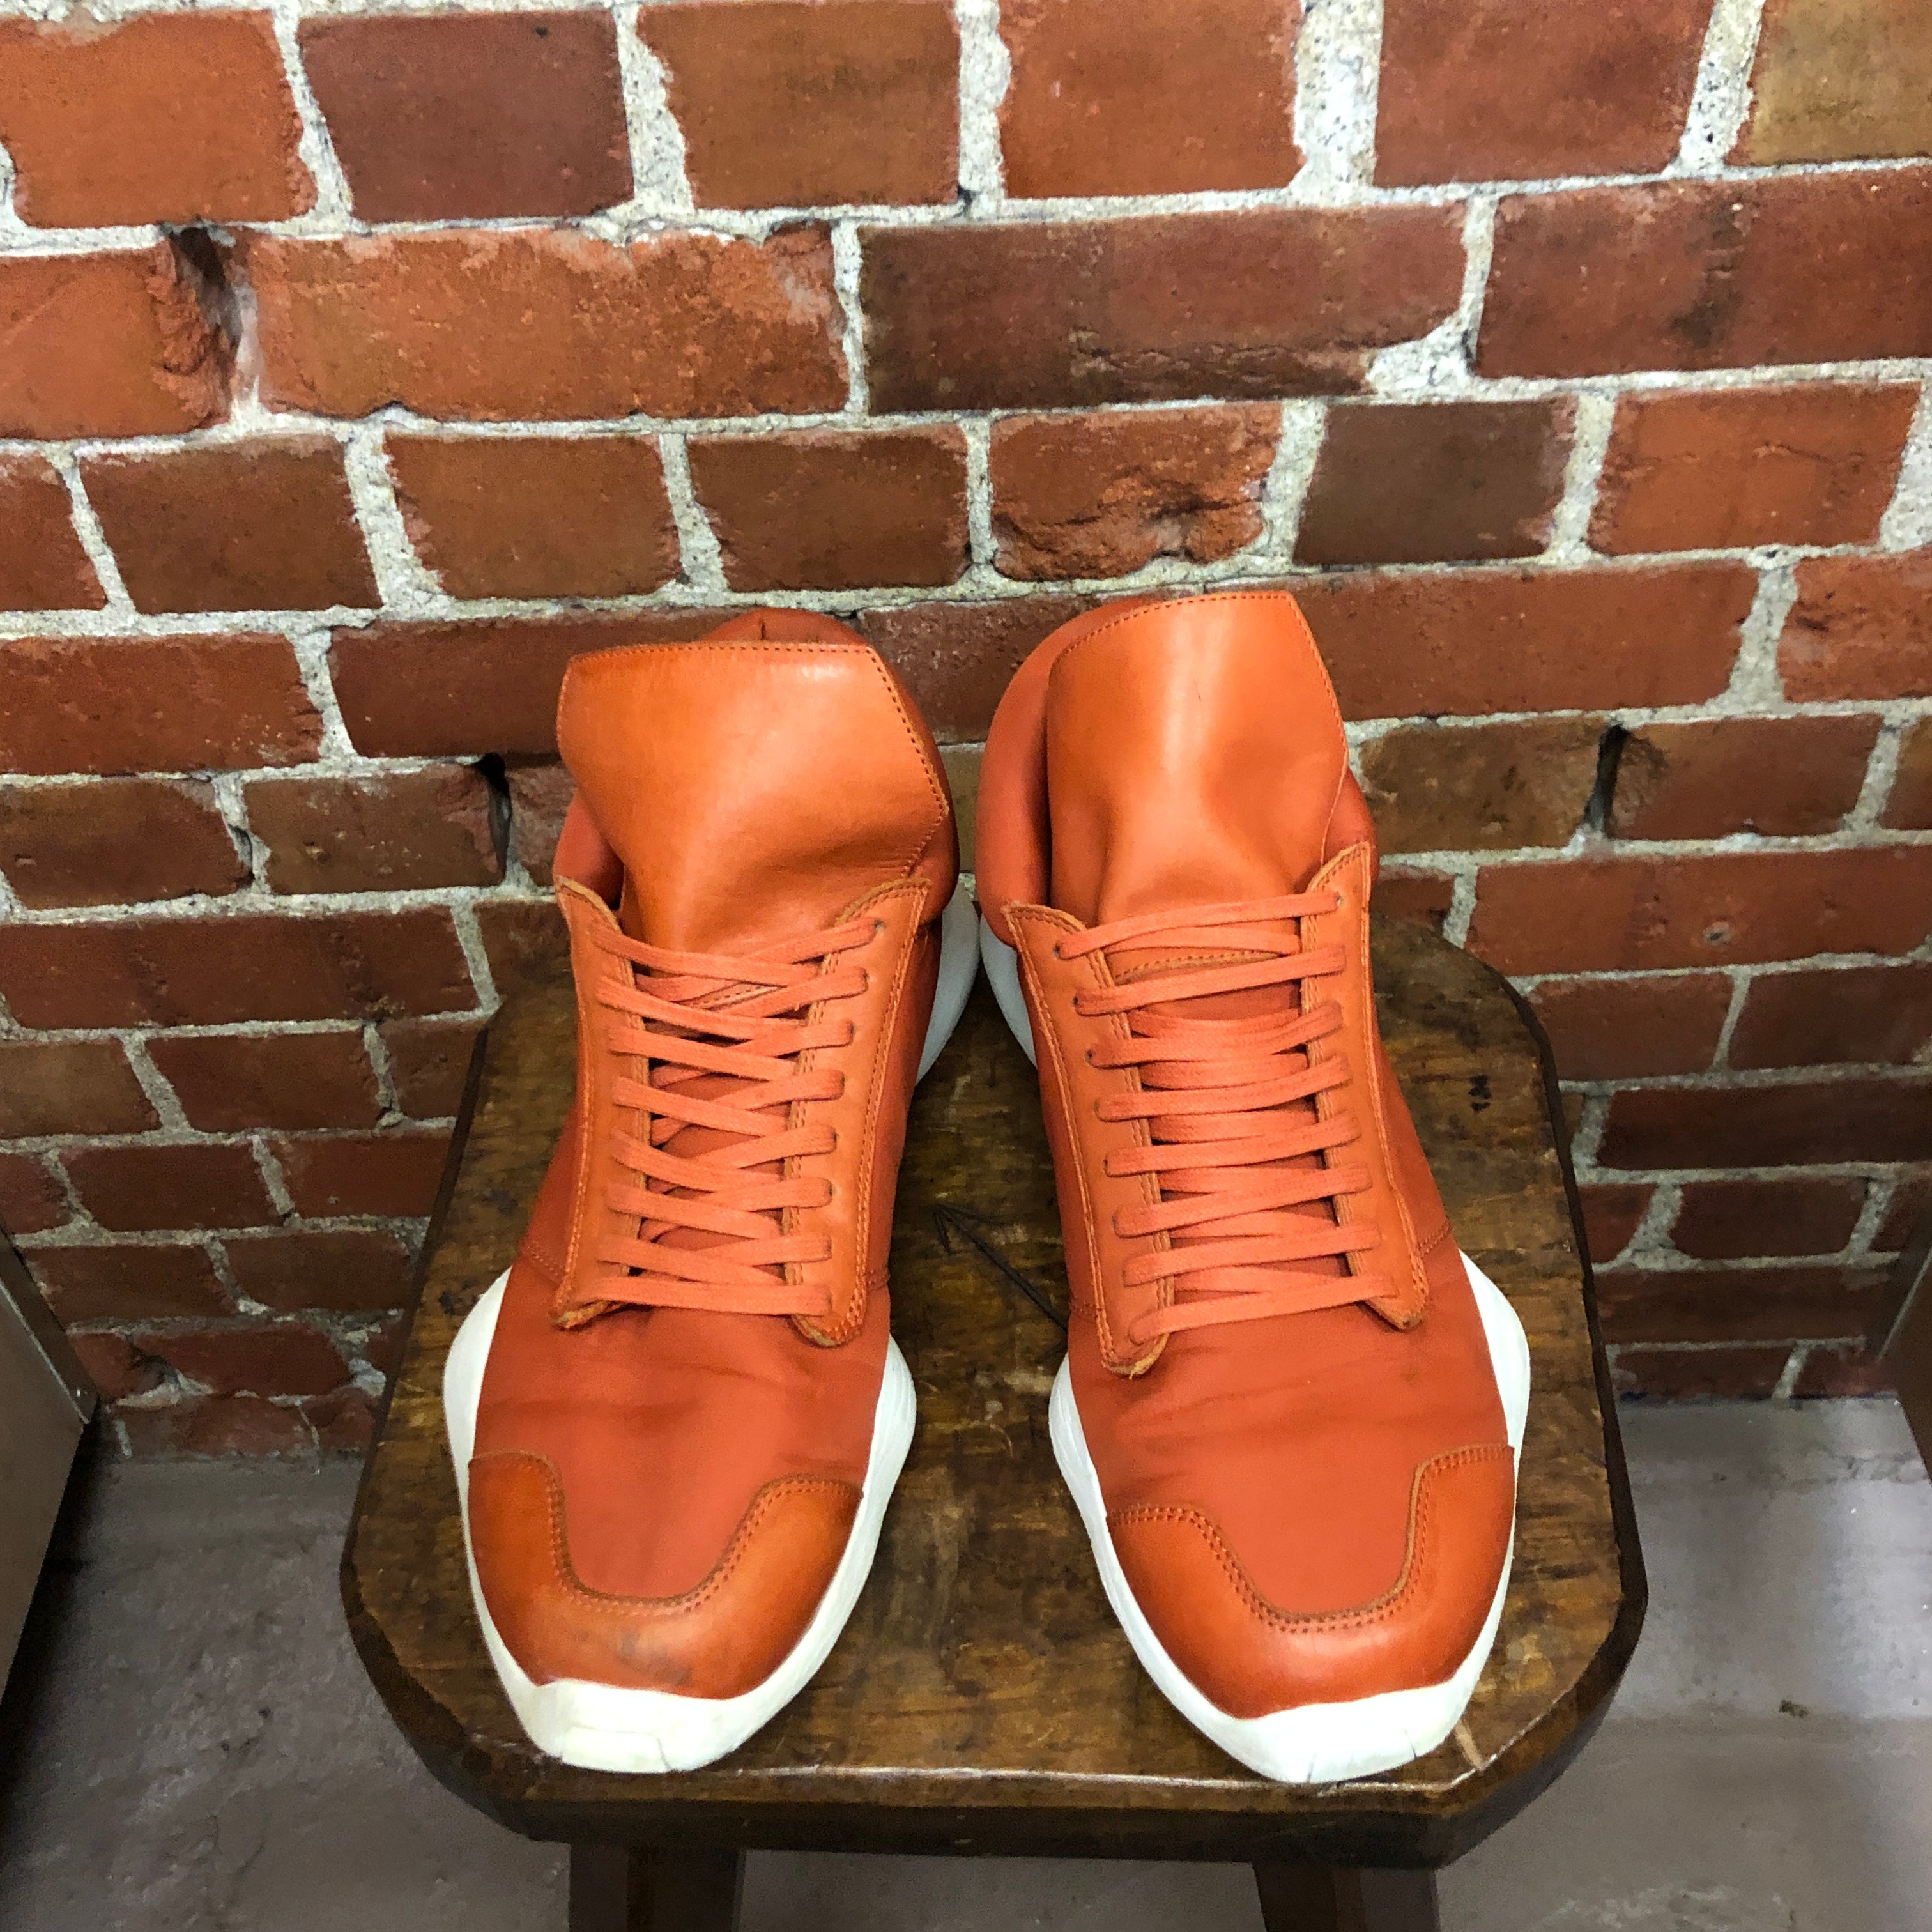 RICK OWENS leather sneakers 9.5